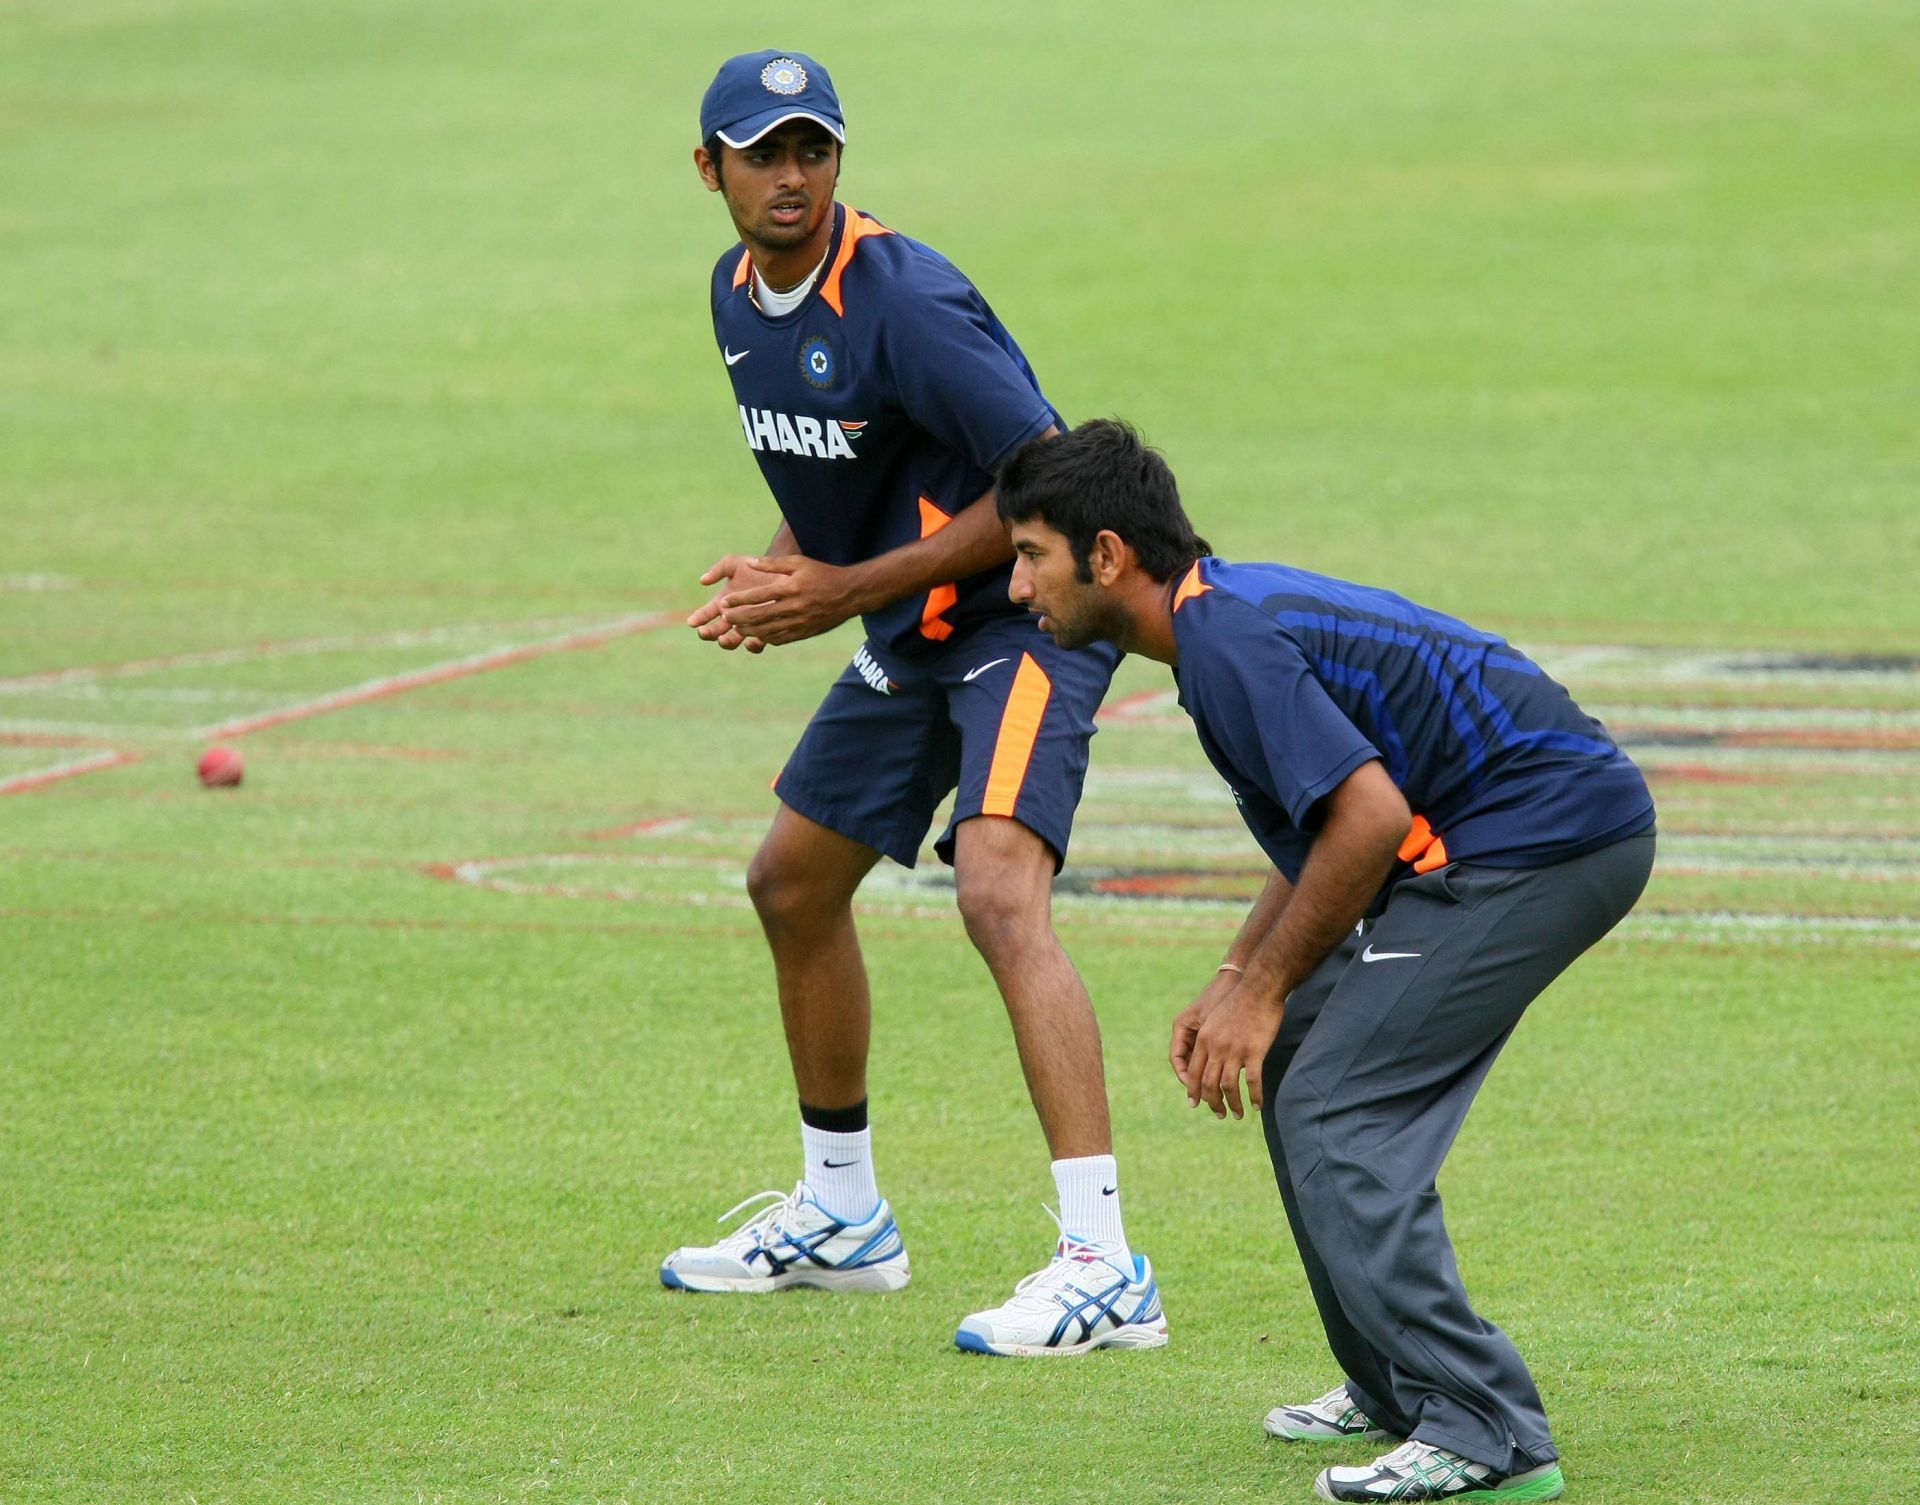 Jaydev Unadkat in action during an India training session